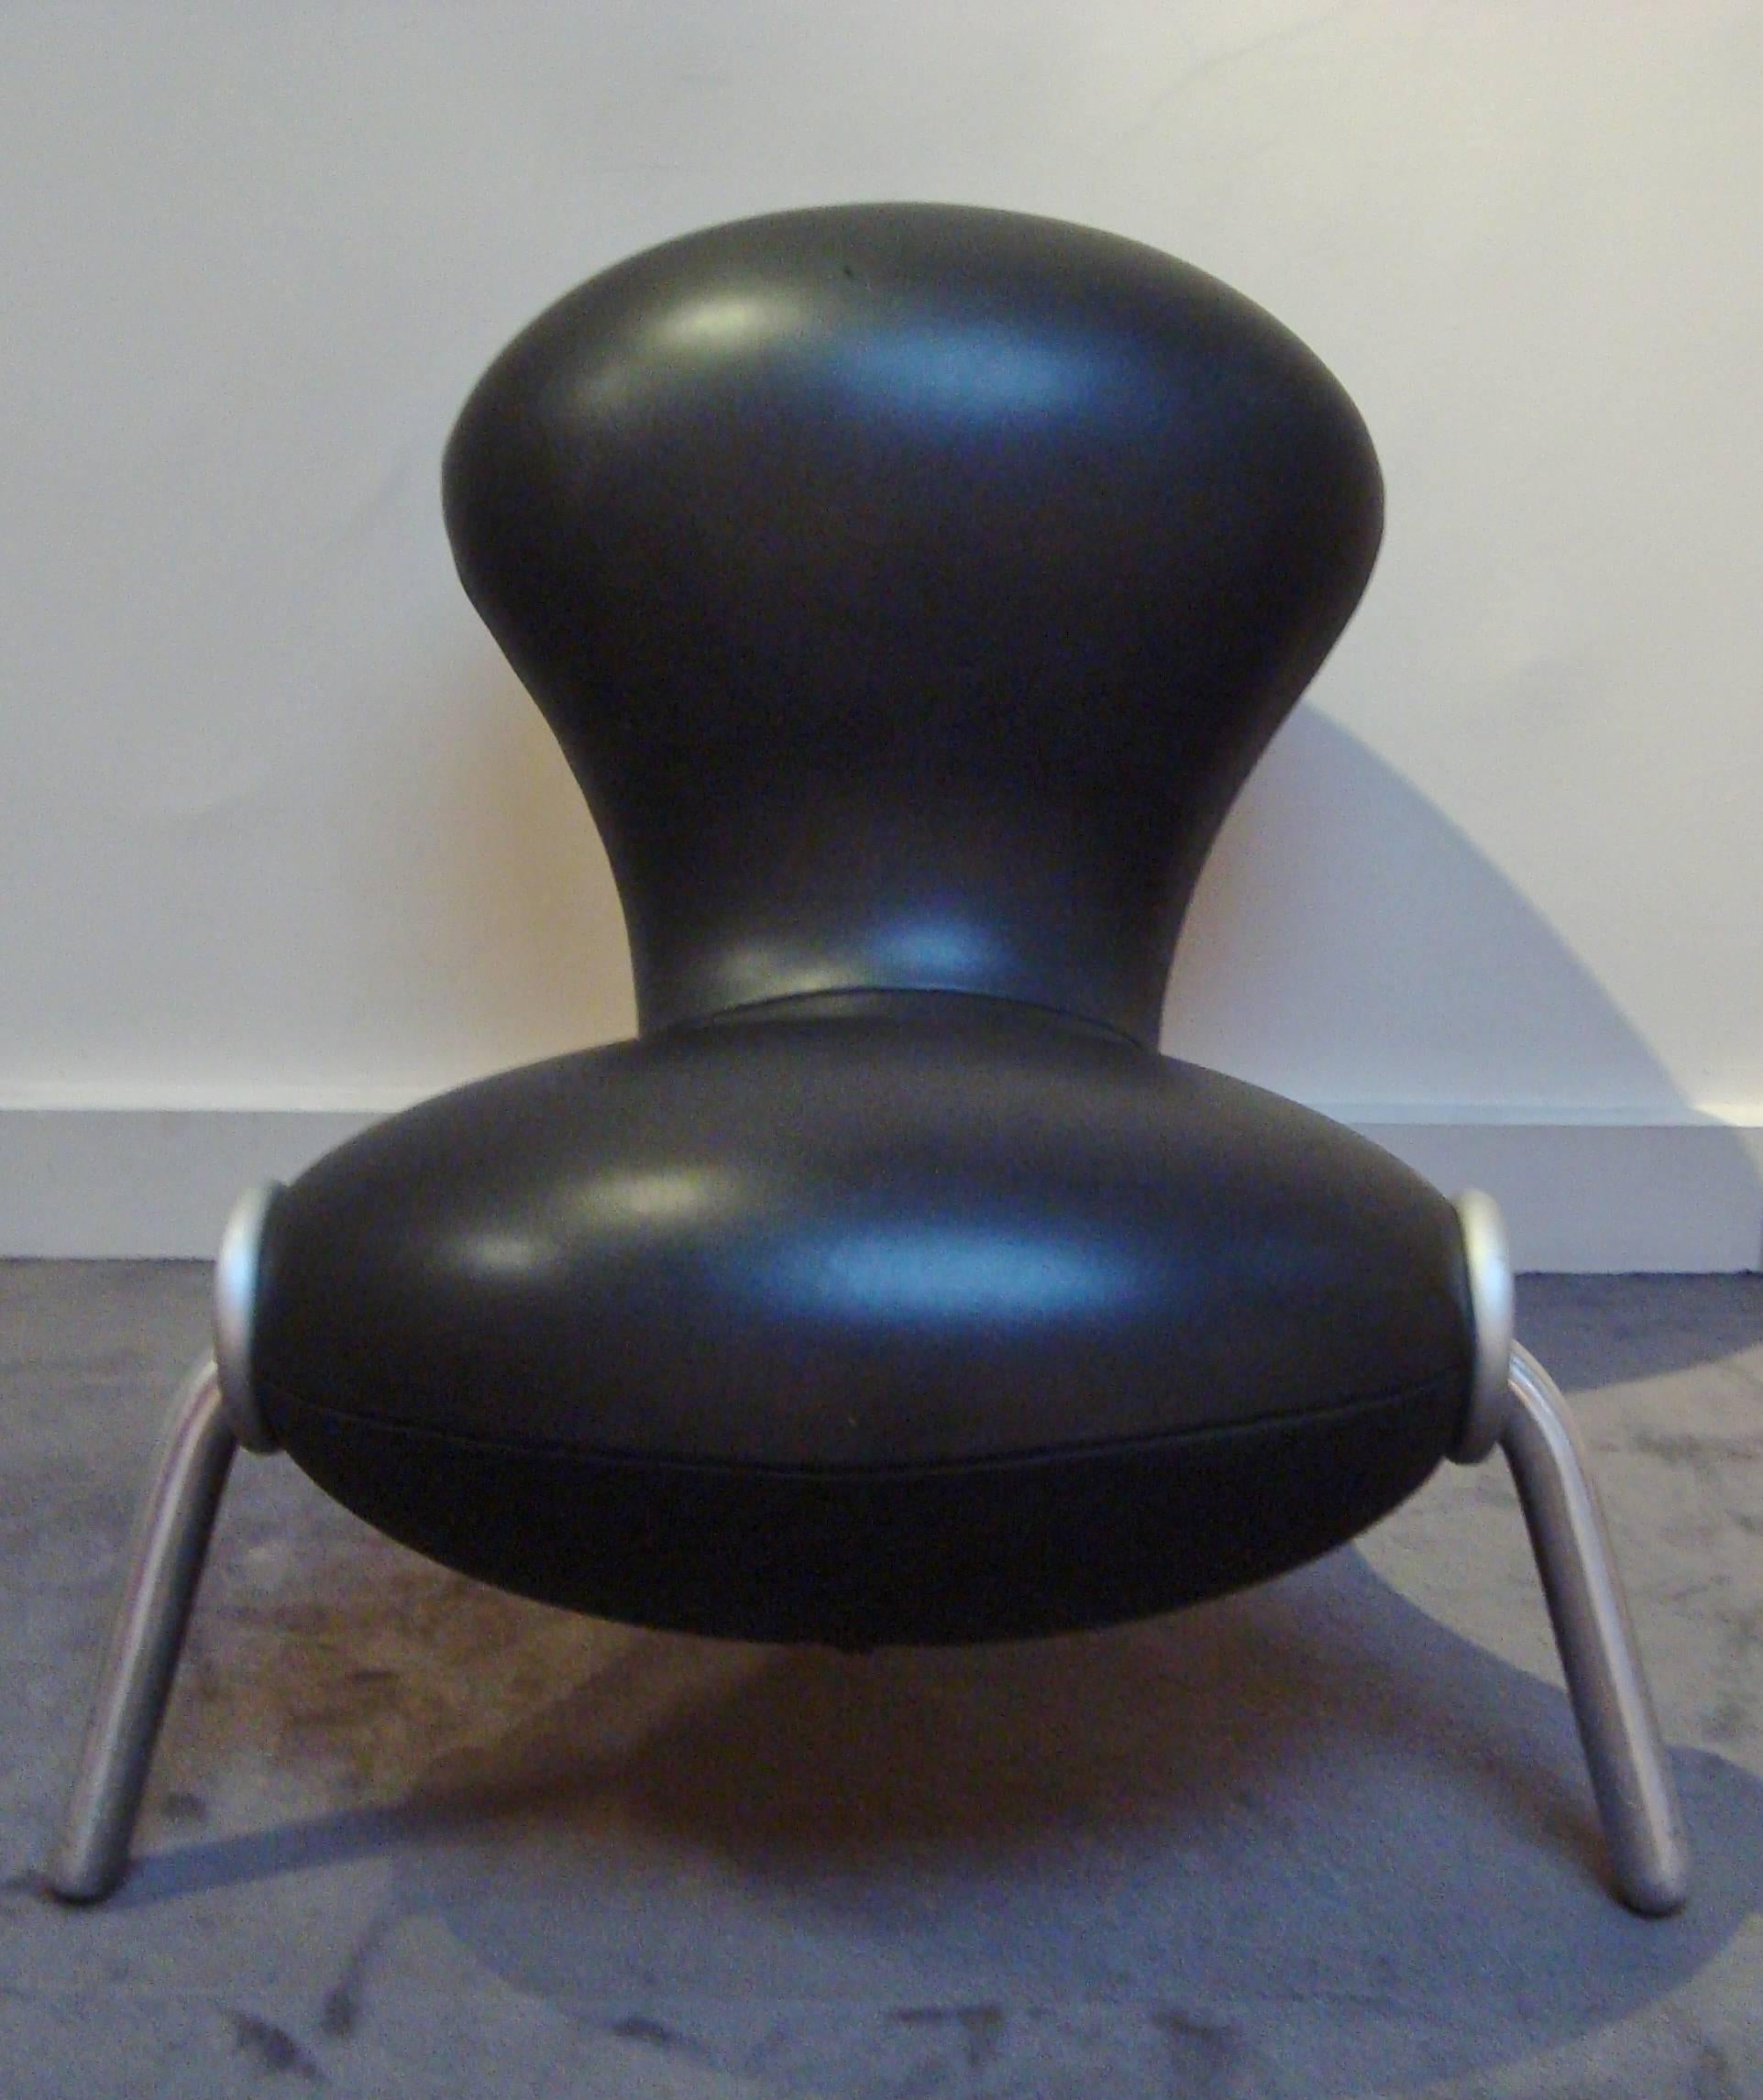 Black embryo chair, 1988, by Marc Newson (Australia 1963-)
ID Edition.
Black neoprene gummi cover with original zip. Tripod tubular steel feet.
Seat height 44 cm.

This chair also exists by Ed.Cappellini and with fabric covering. 
Réf : Anne